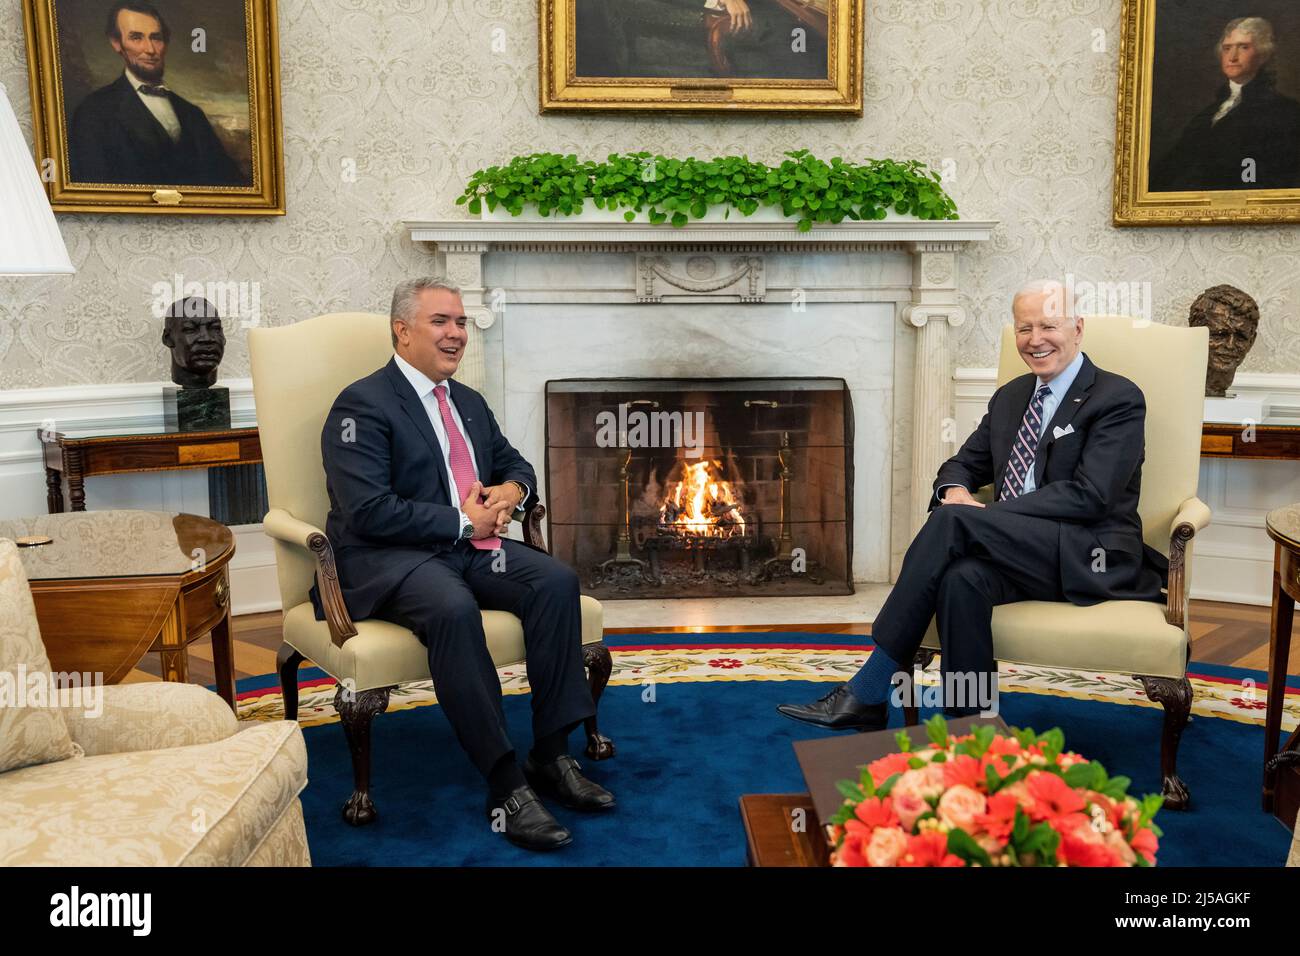 Washington, United States of America. 10 March, 2022. U.S President Joe Biden meets with meets with Colombian President Ivan Duque, left, in the Oval Office of the White House March 10, 2022 in Washington, D.C.  Credit: Adam Schultz/White House Photo/Alamy Live News Stock Photo